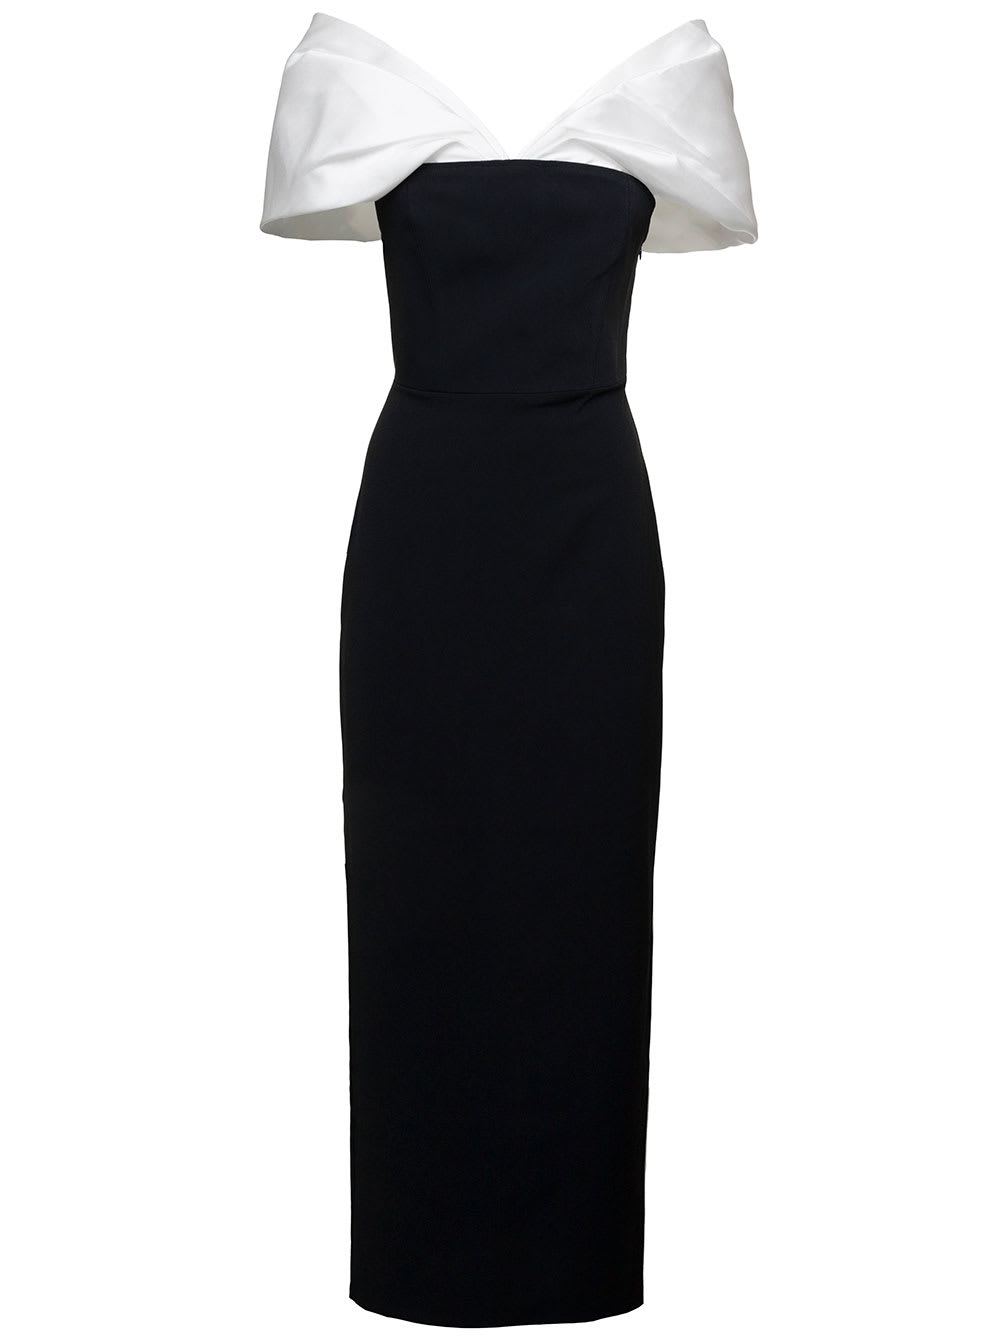 SOLACE LONDON DAKOTA MAXI BLACK DRESS WITH OFF-SHOULDER NECKLINE AND SATIN INSERTS IN POLYESTER WOMAN